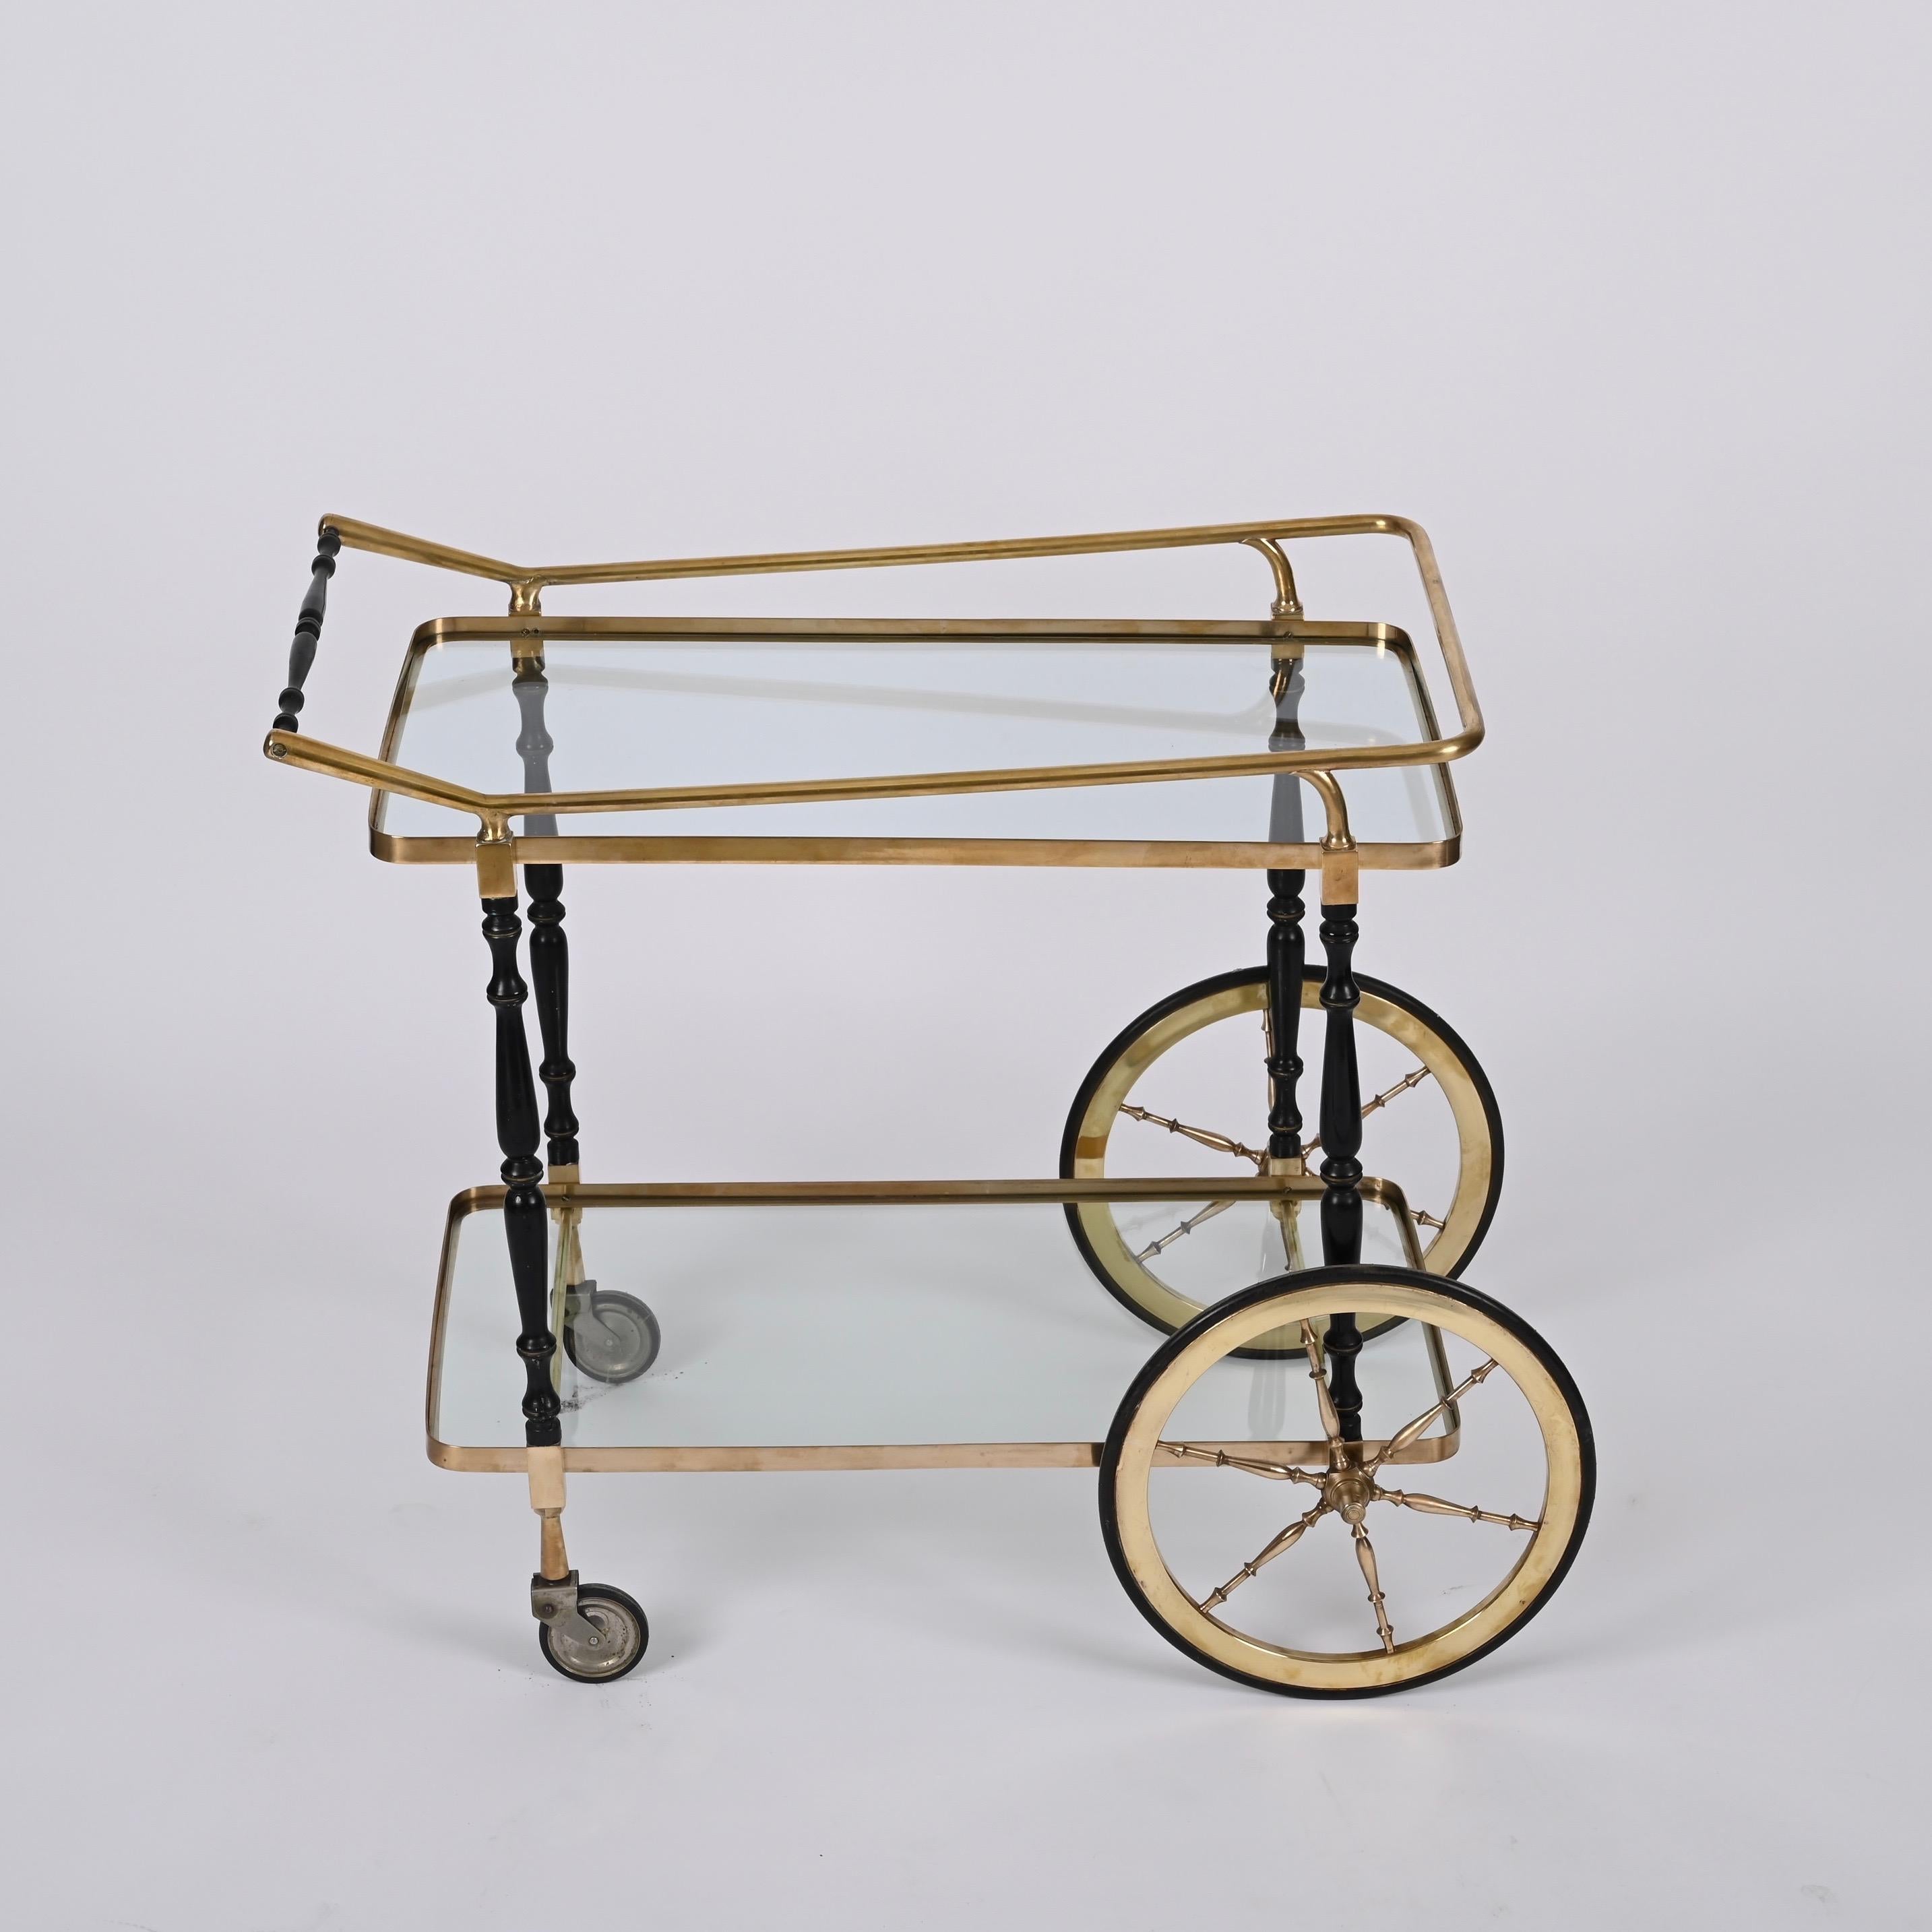 Midcentury Cesare Lacca Brass and Black Lacquer Wood Italian Bar Cart, 1950s For Sale 5